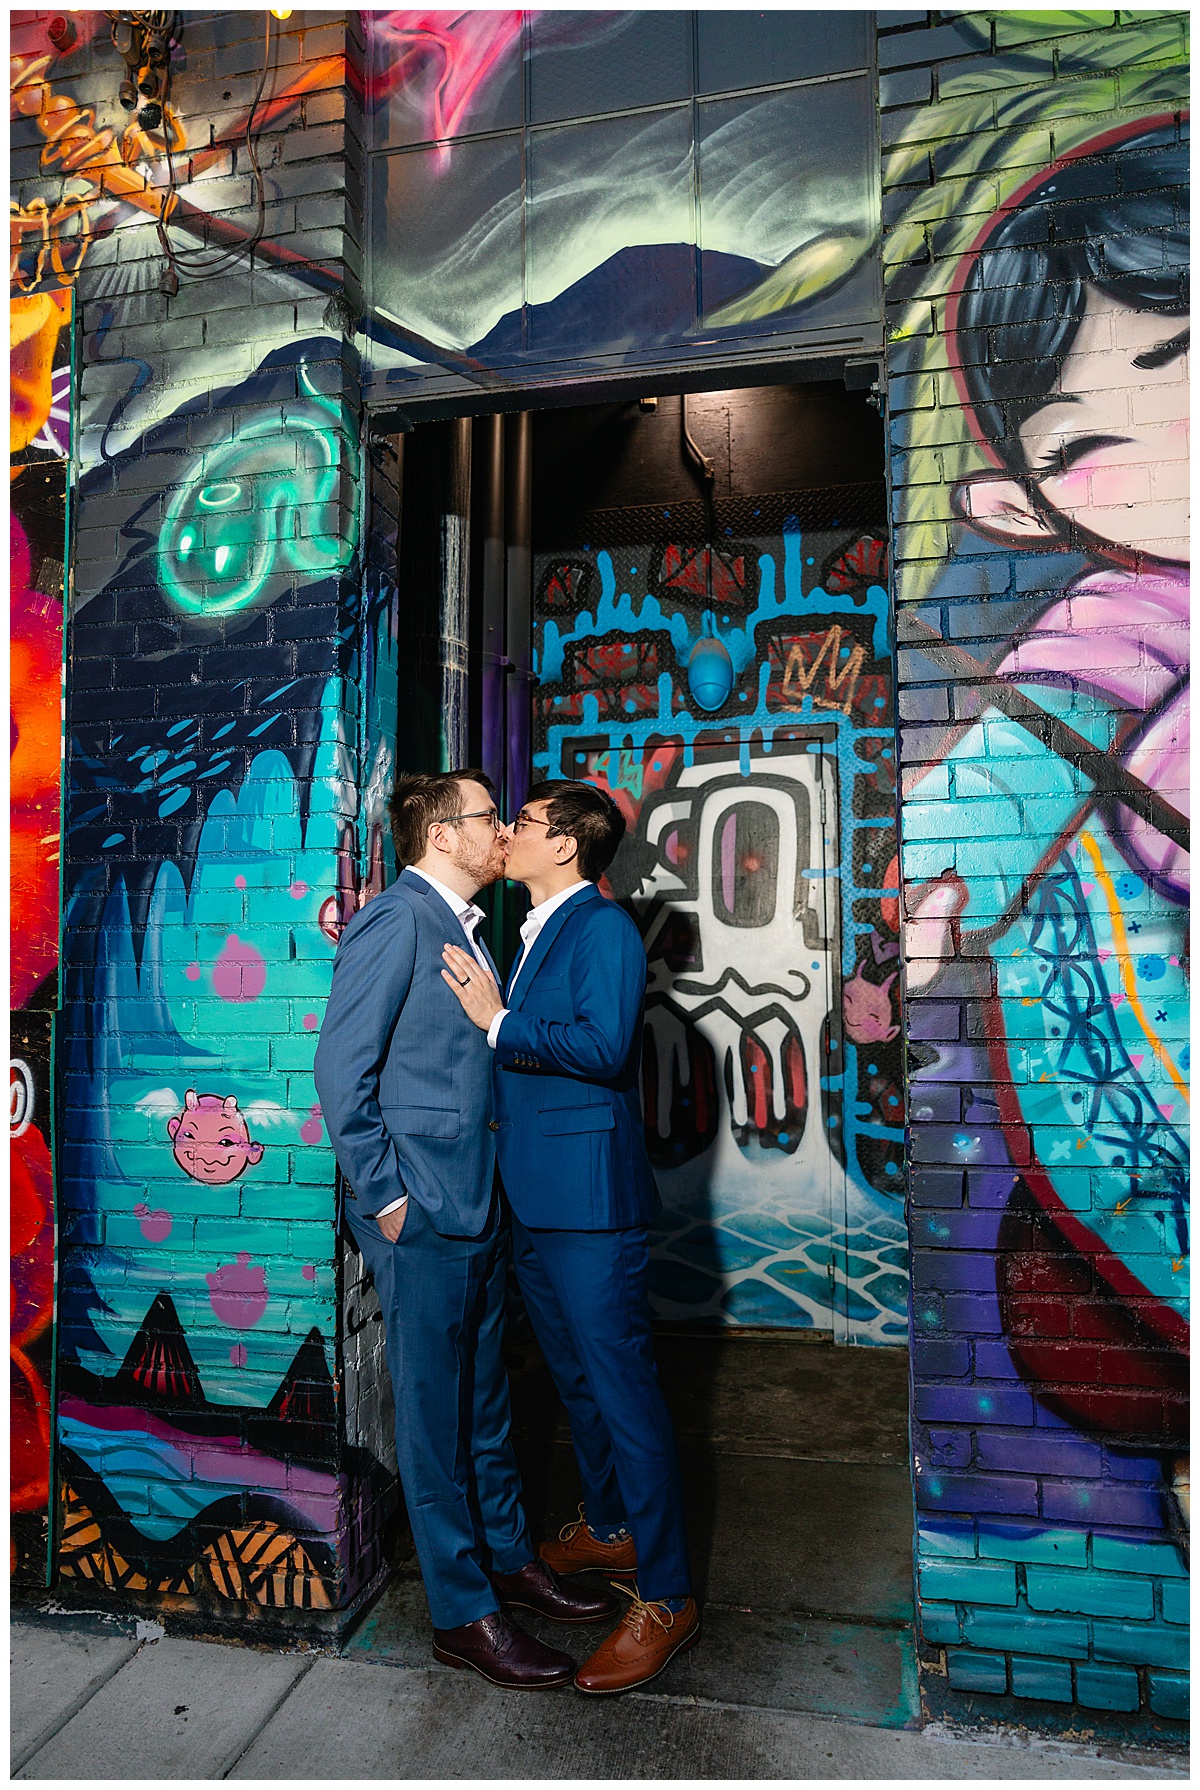 Two men pose in front of a graffitied wall dressed in blue suits